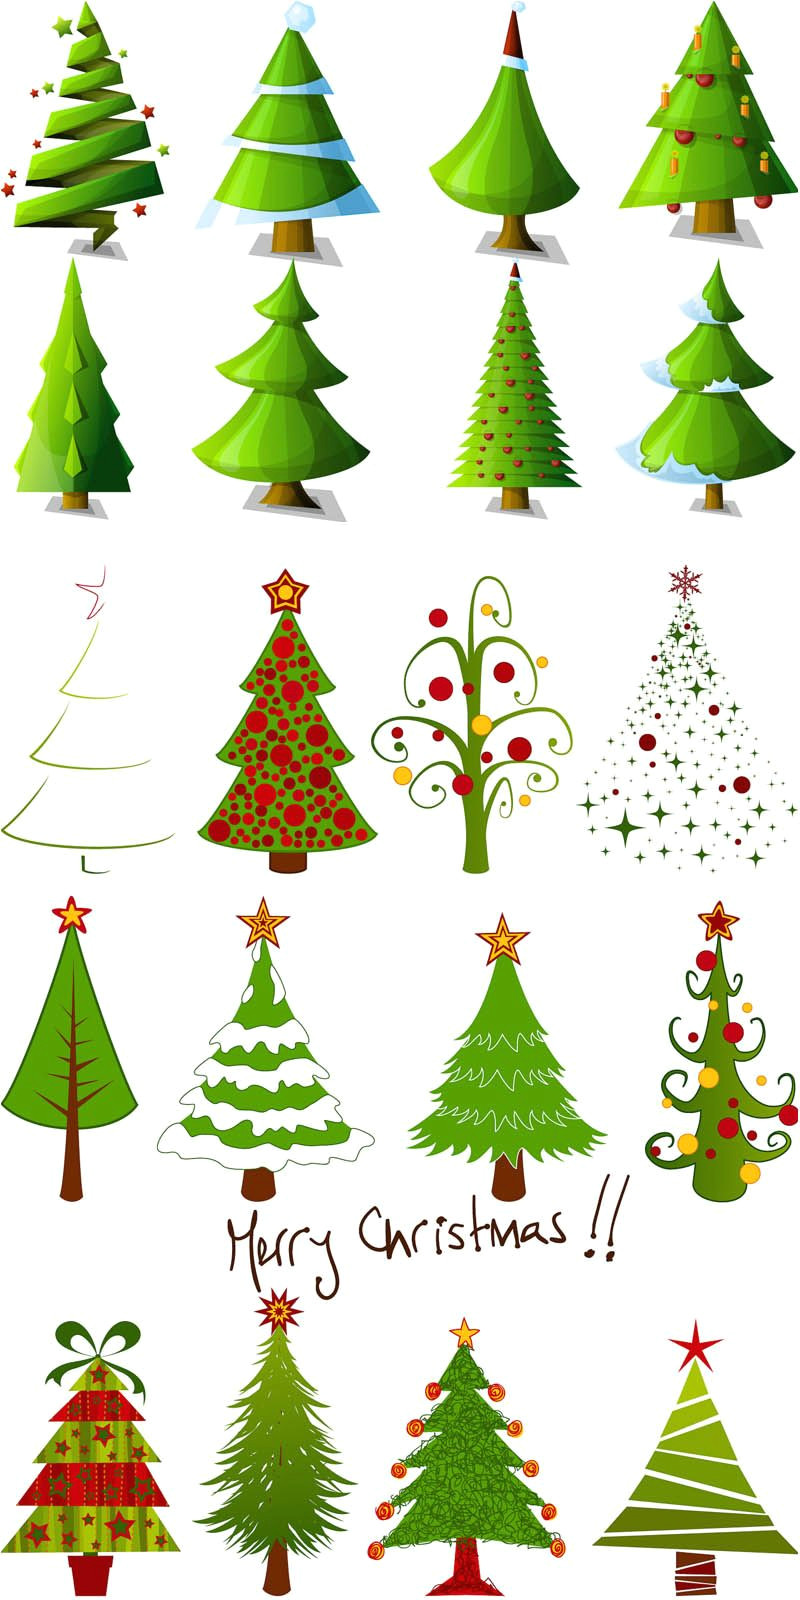 Drawing Xmas Decorations 2 Sets Of 20 Vector Cartoon Christmas Tree Designs In Different